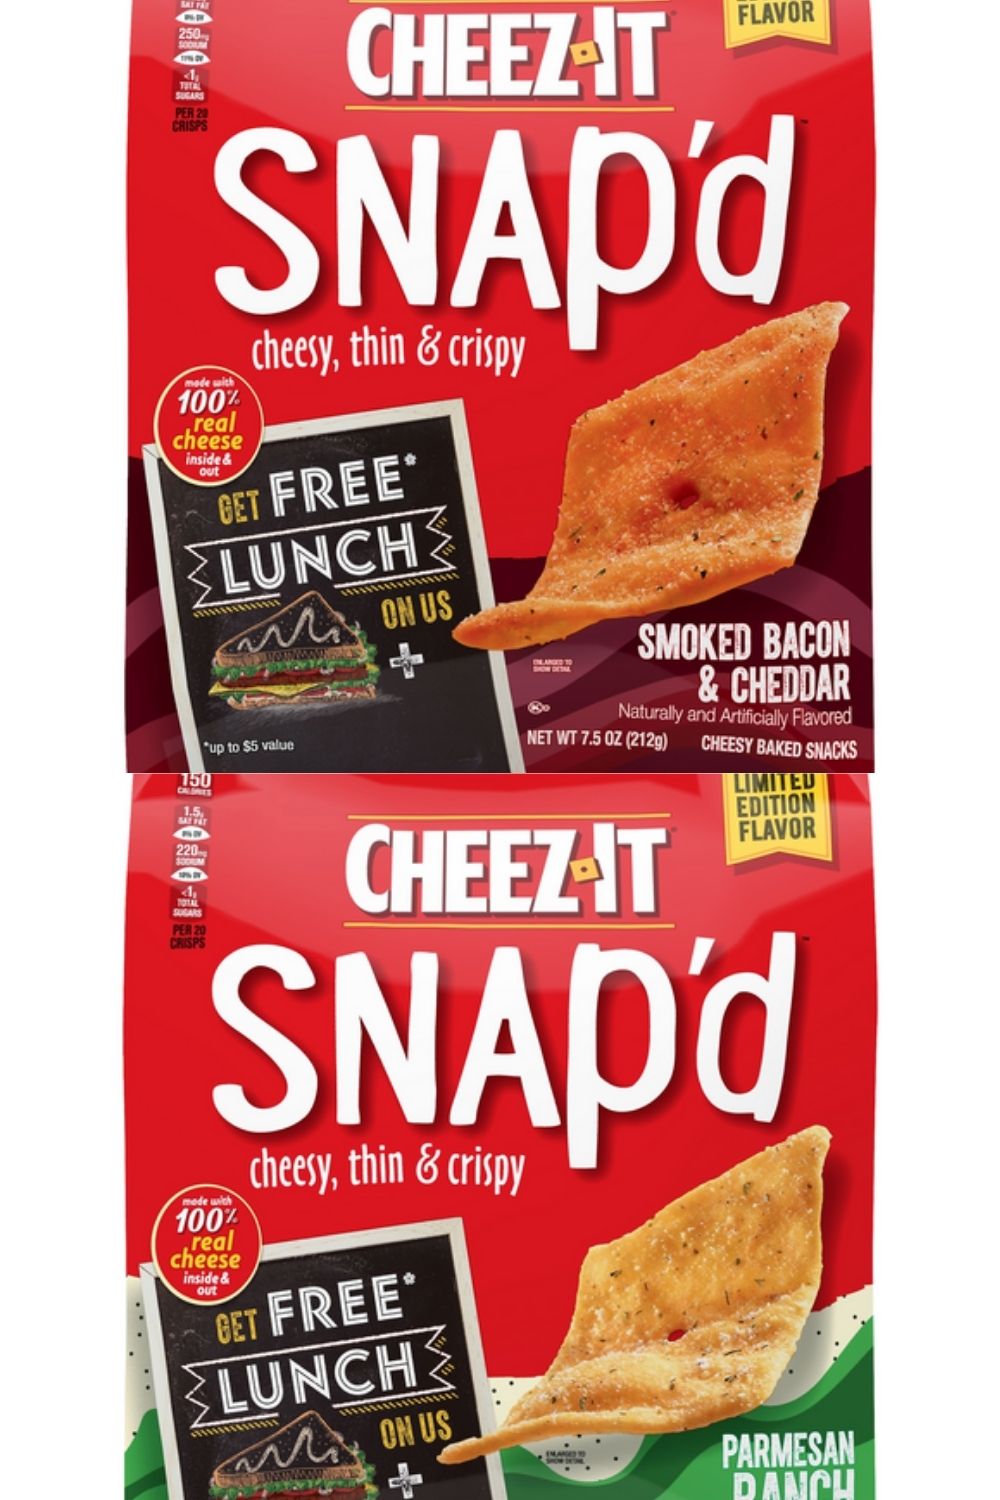 Cheez-it snap'd bacon cheddar and cheez-it snap'd parmesan ranch